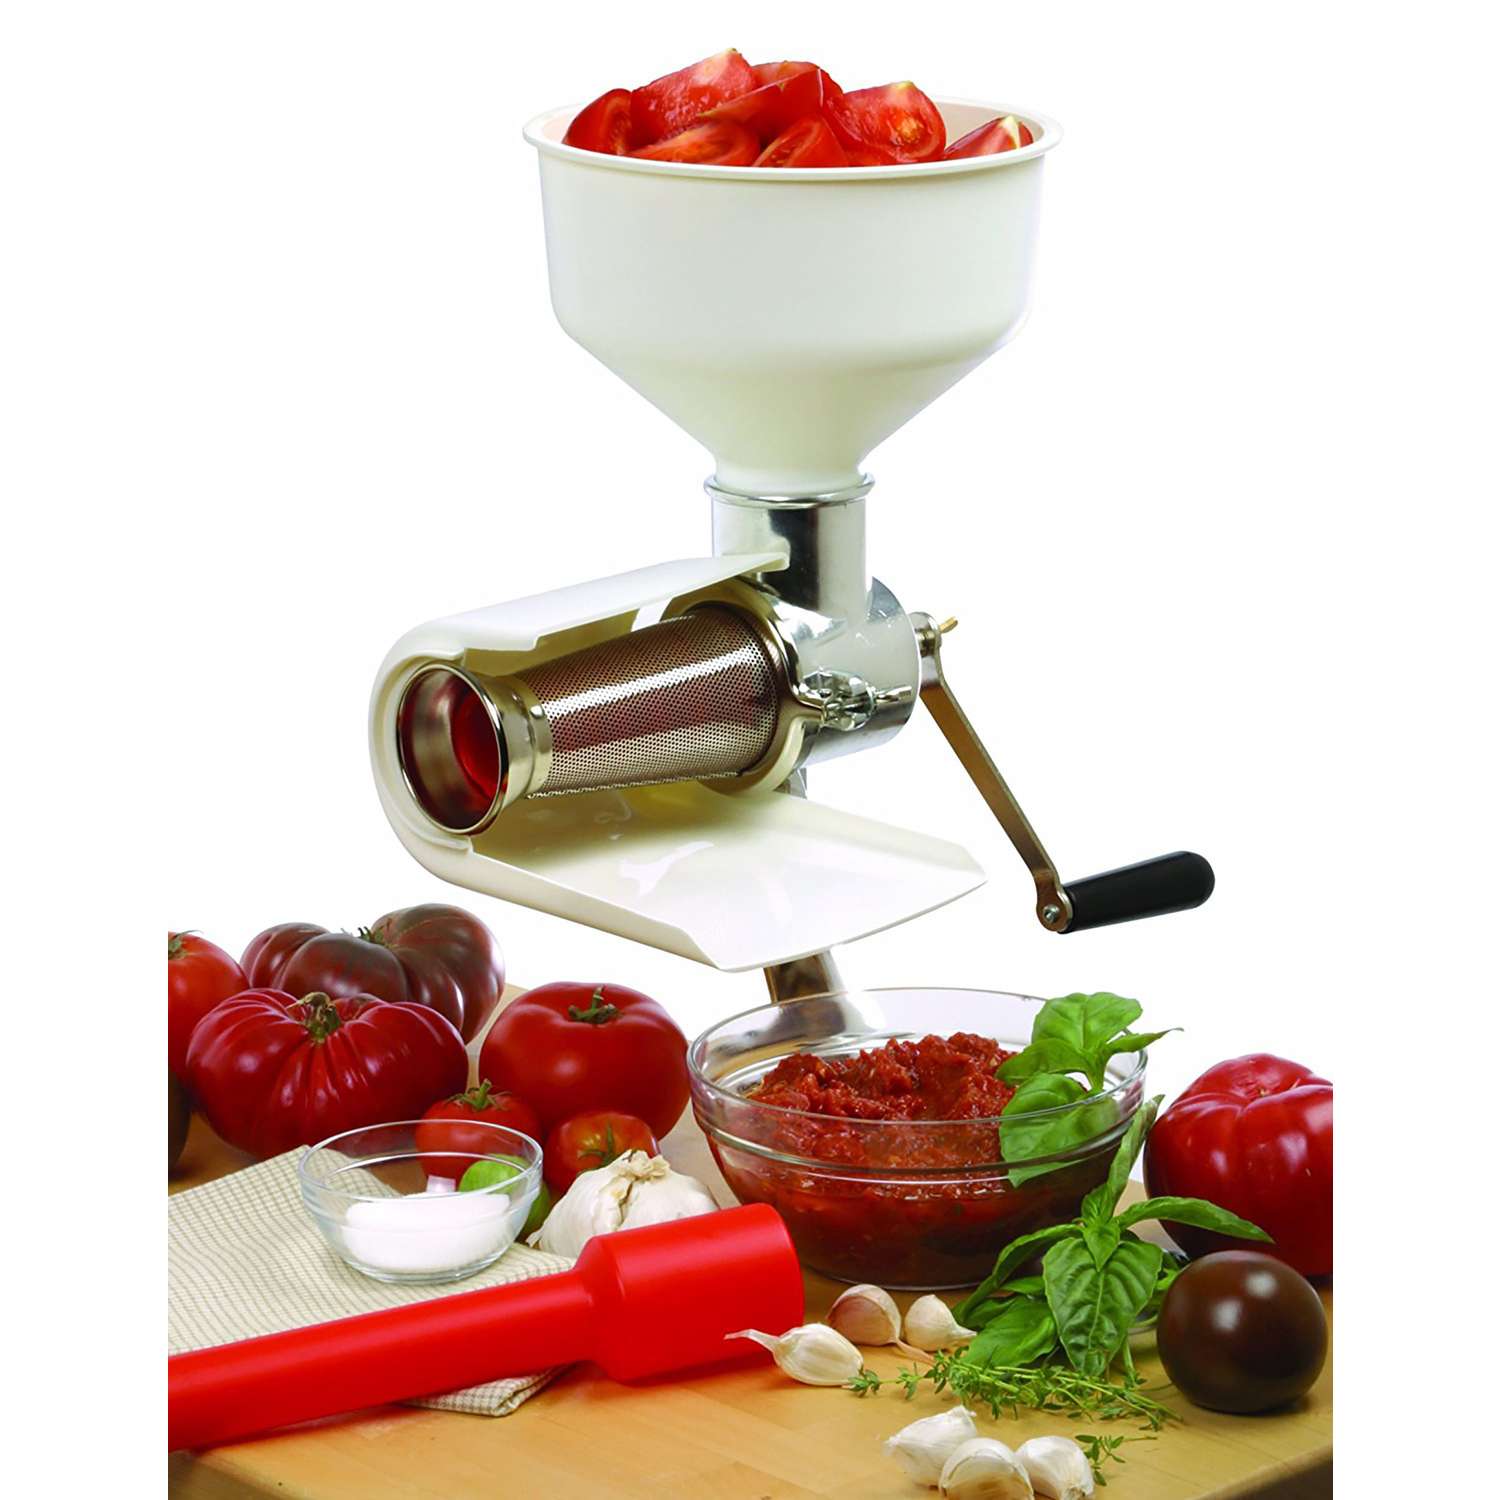 Assembling the Fruit and Vegetable Strainer Attachment 